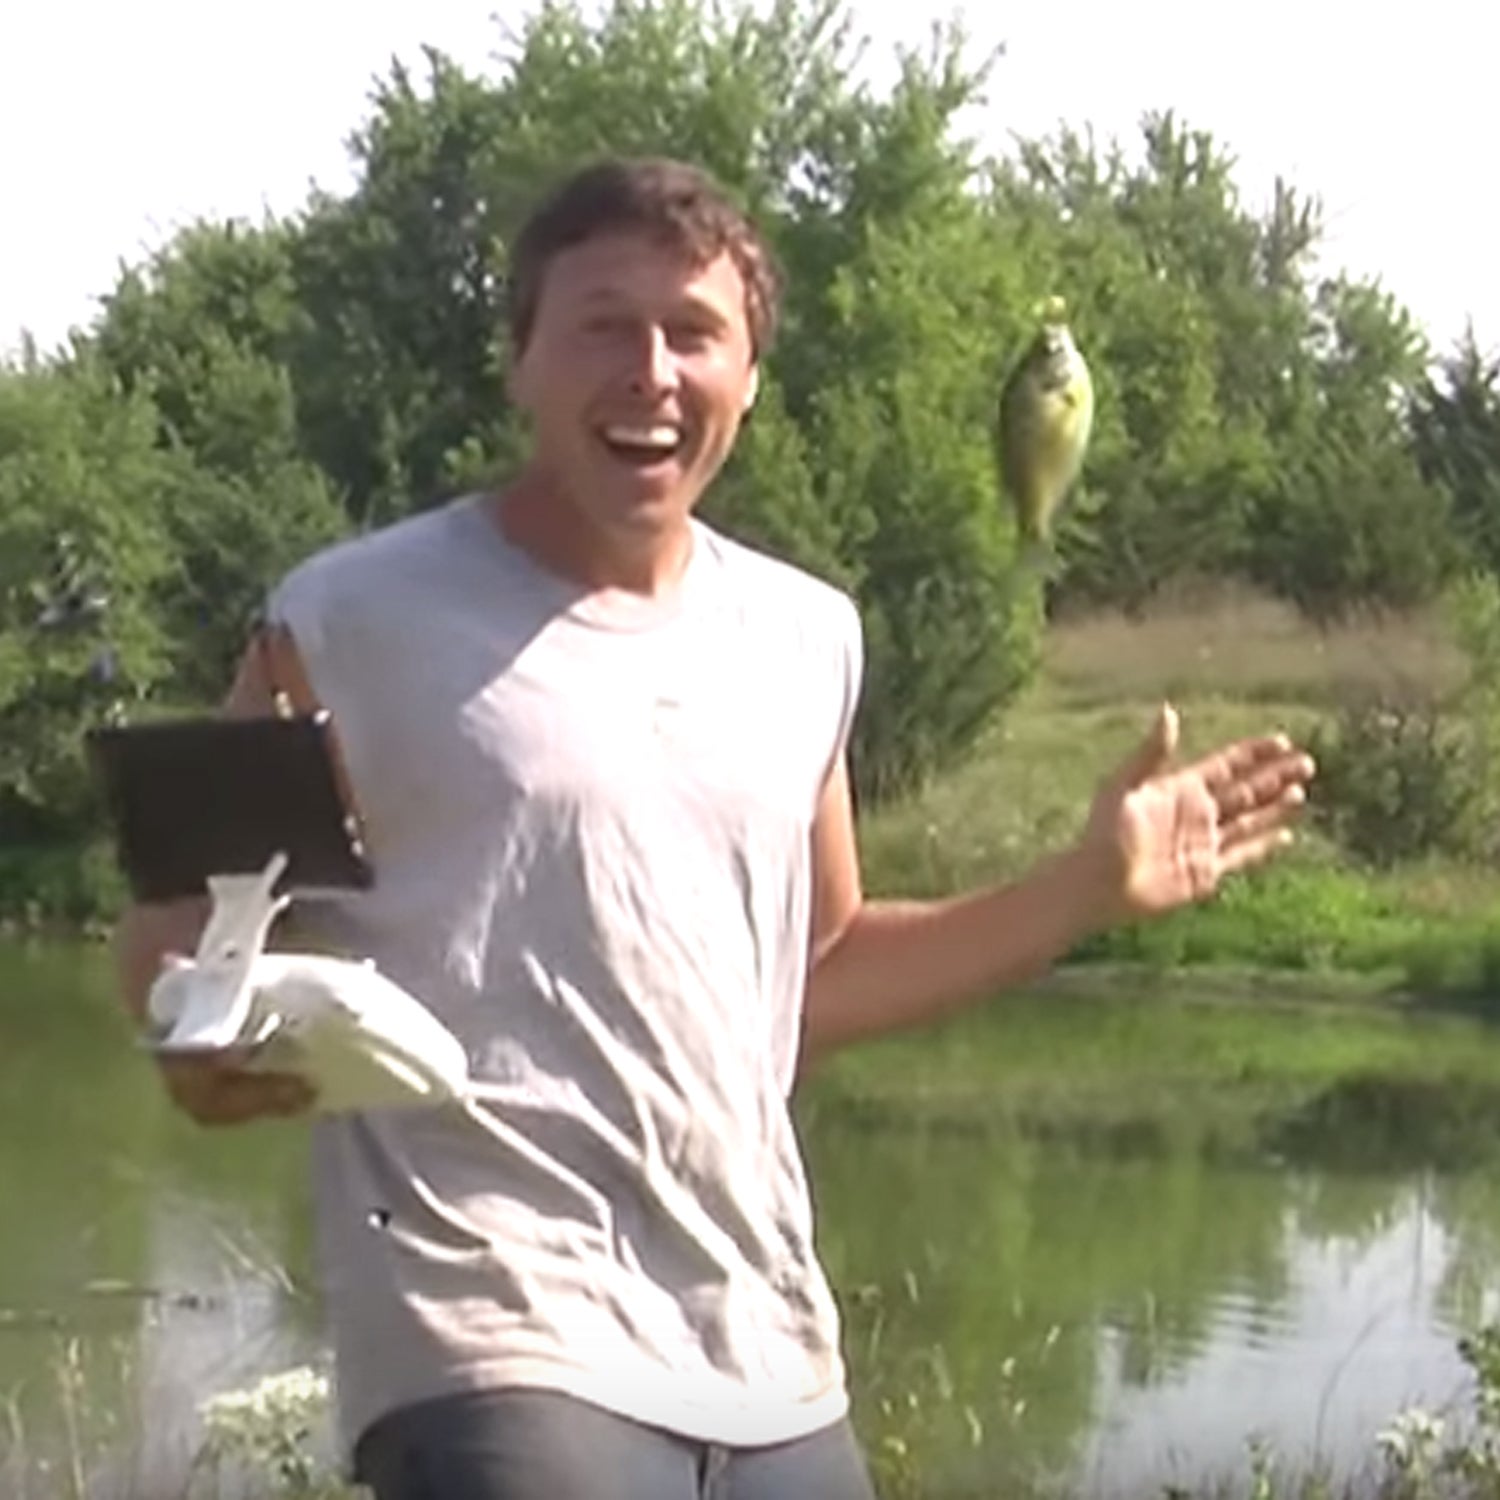 WATCH: Drone Catches Fish